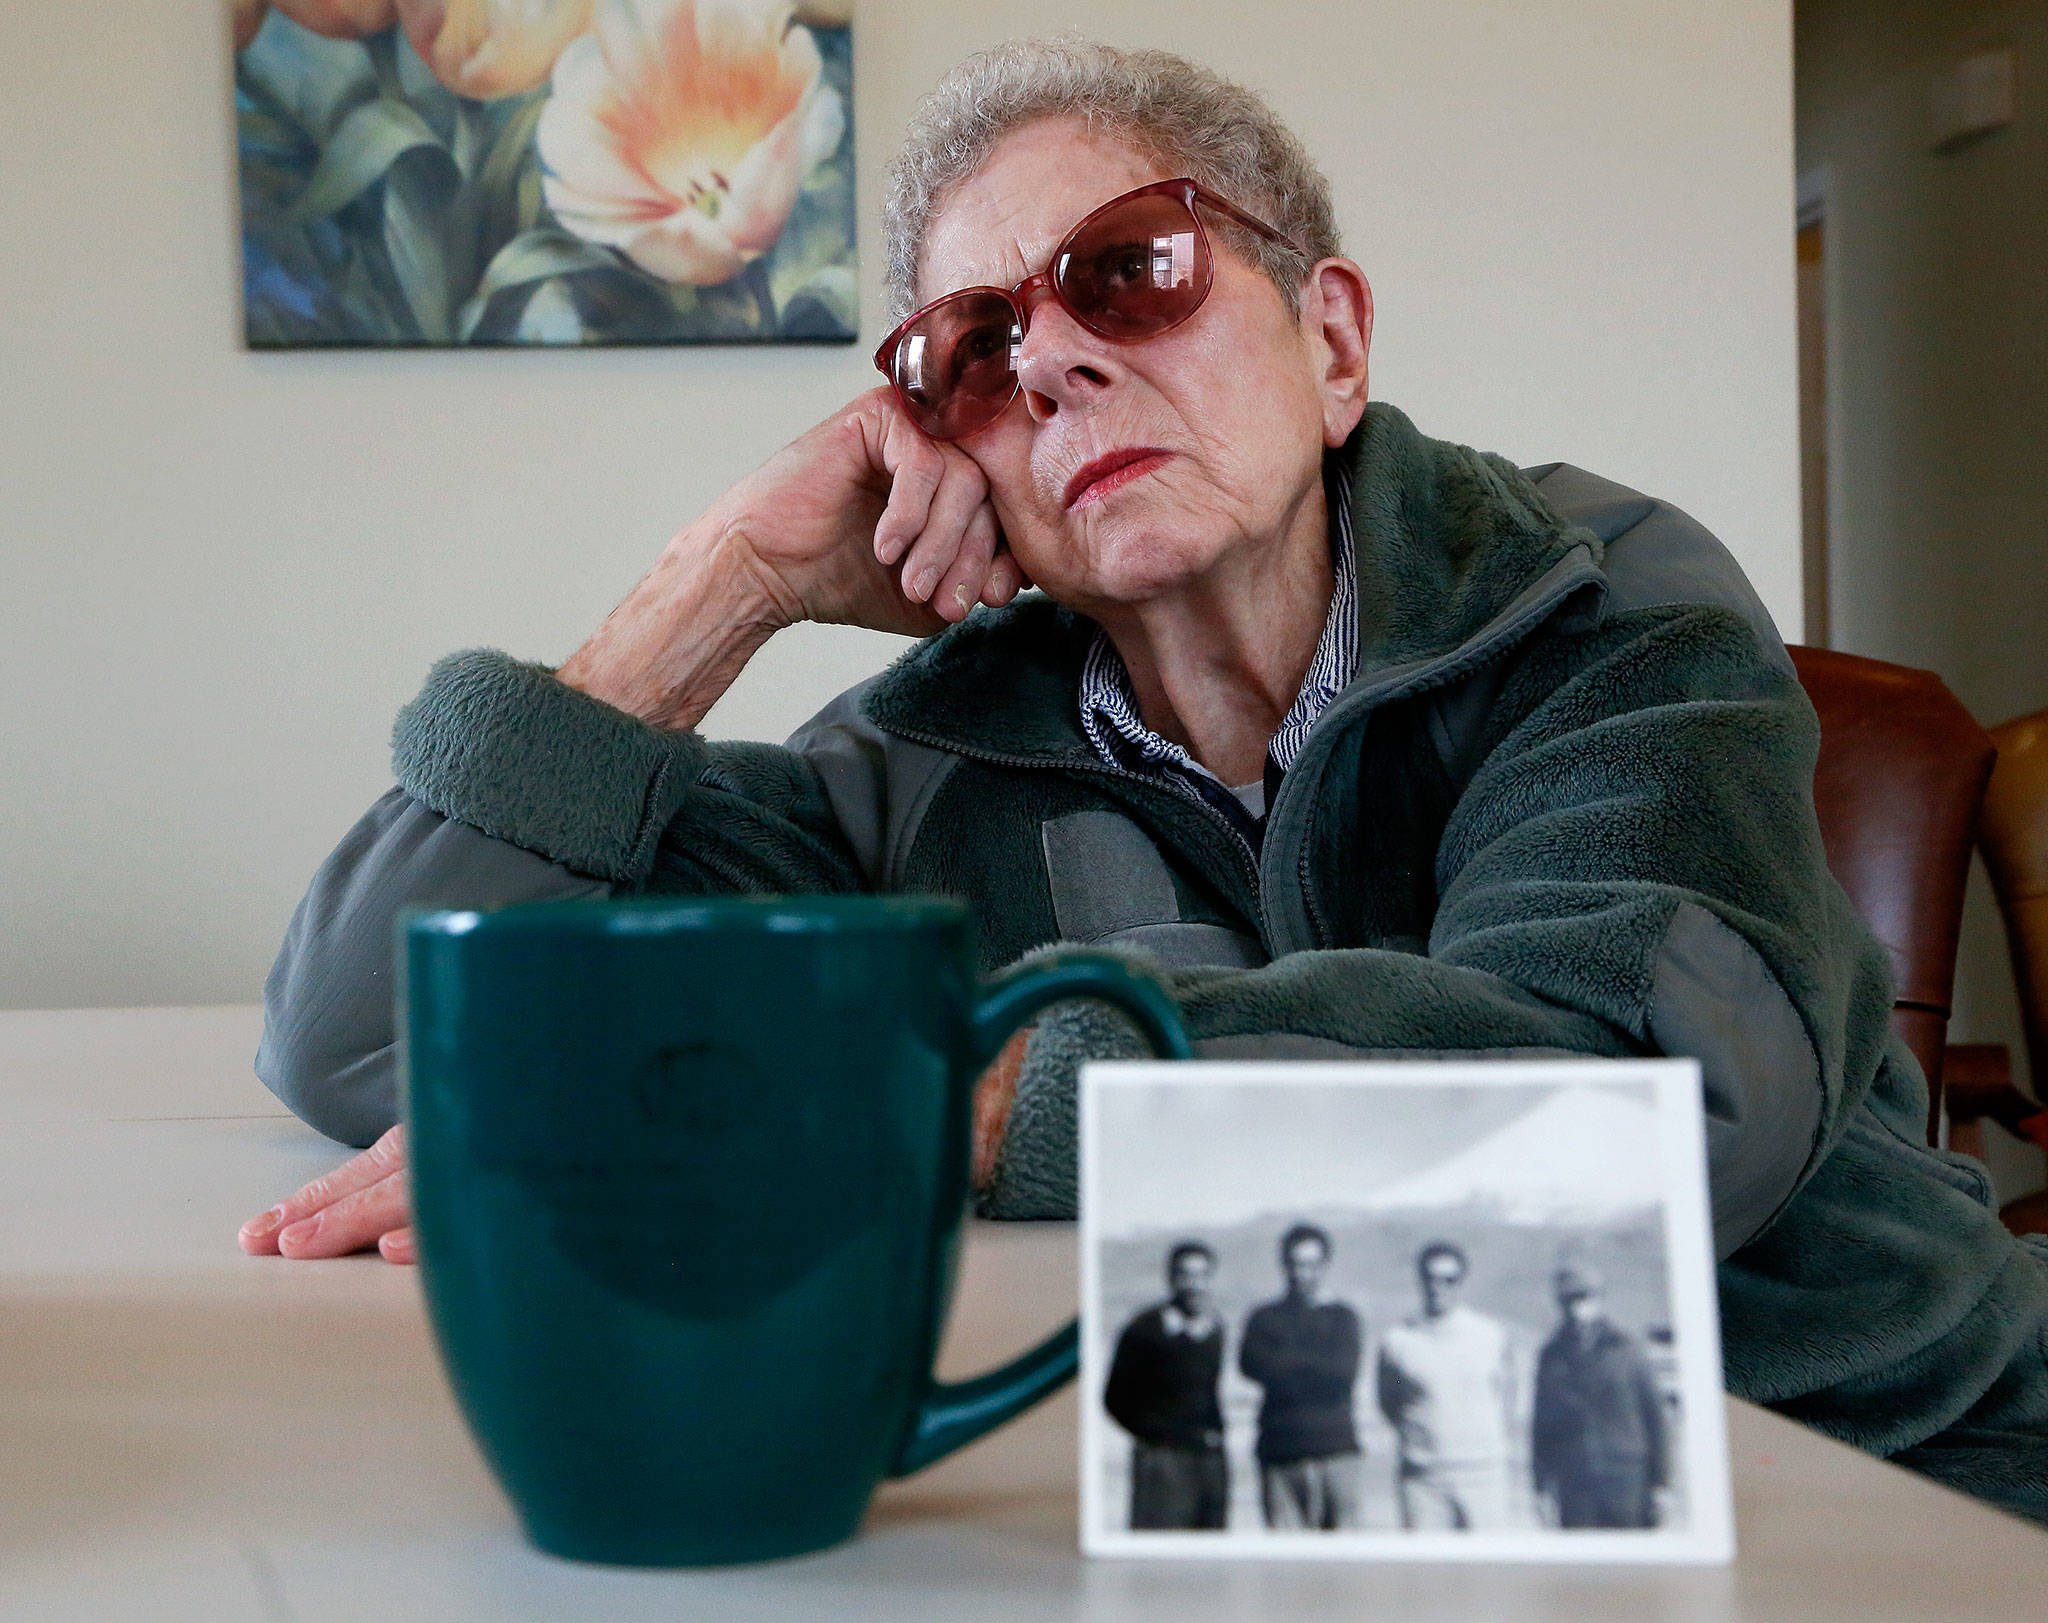 Everett’s Doris Sinclair, 88, reflects on a chilling experience she had while traveling by train from Iran to Soviet Georgia in 1964. Detained by Soviet authorities, she was interrogated for three days before being allowed to continue with her trip. Sinclair and her husband, who was in the U.S. Air Force, lived in Iran from 1963 to 1968. In the foreground is a photo of several men in Iran, one of whom was her driver in those years. (Dan Bates / The Herald)